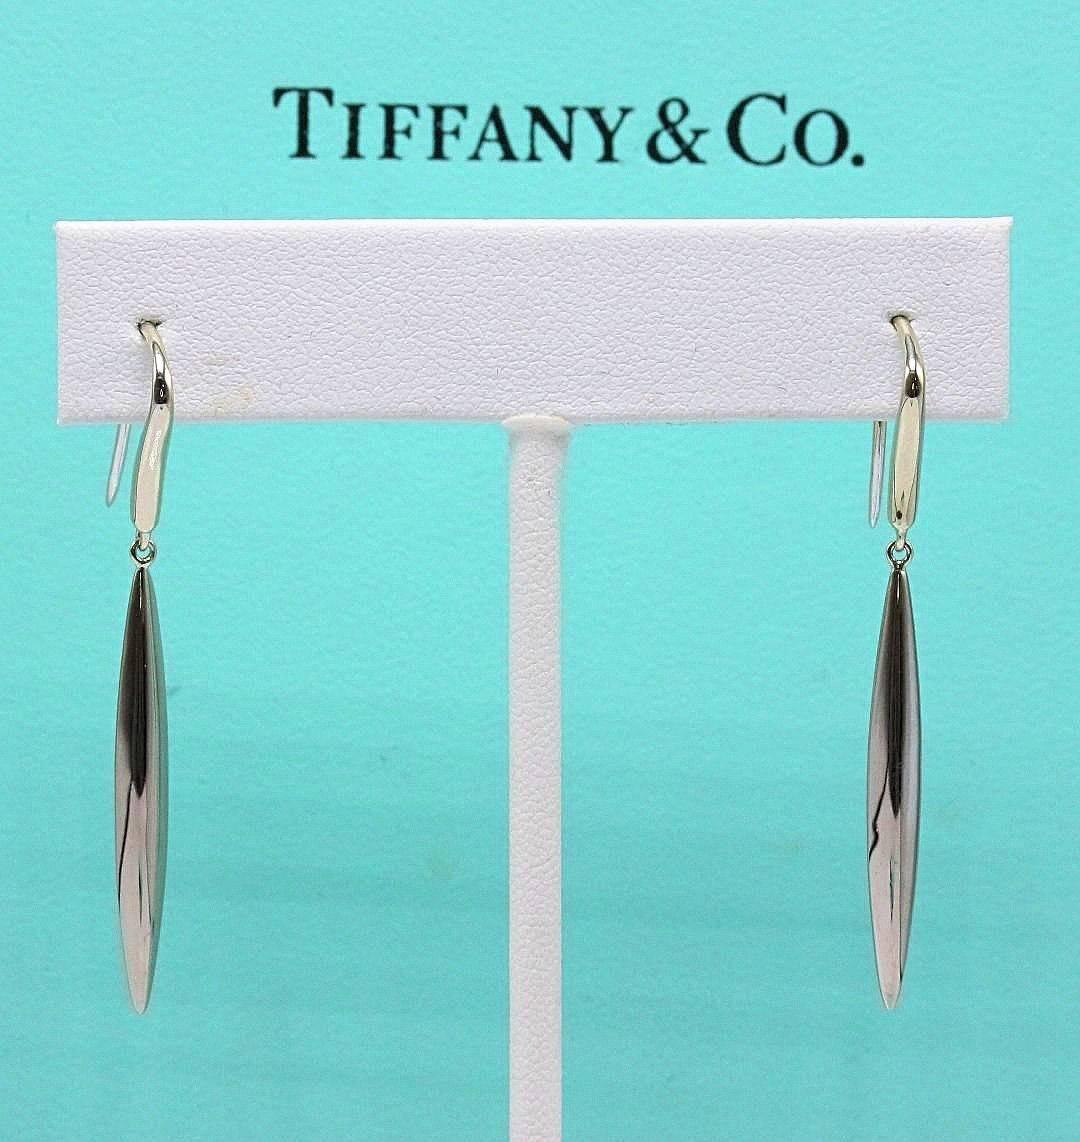 Tiffany & Co.
Style:  Feather Hook dangle Earrings
Length:  1.75 inches
Metal:  18KT White Gold
Hallmark:  ©T&Co.750
Includes:  Tiffany & Co. jewelry pouch